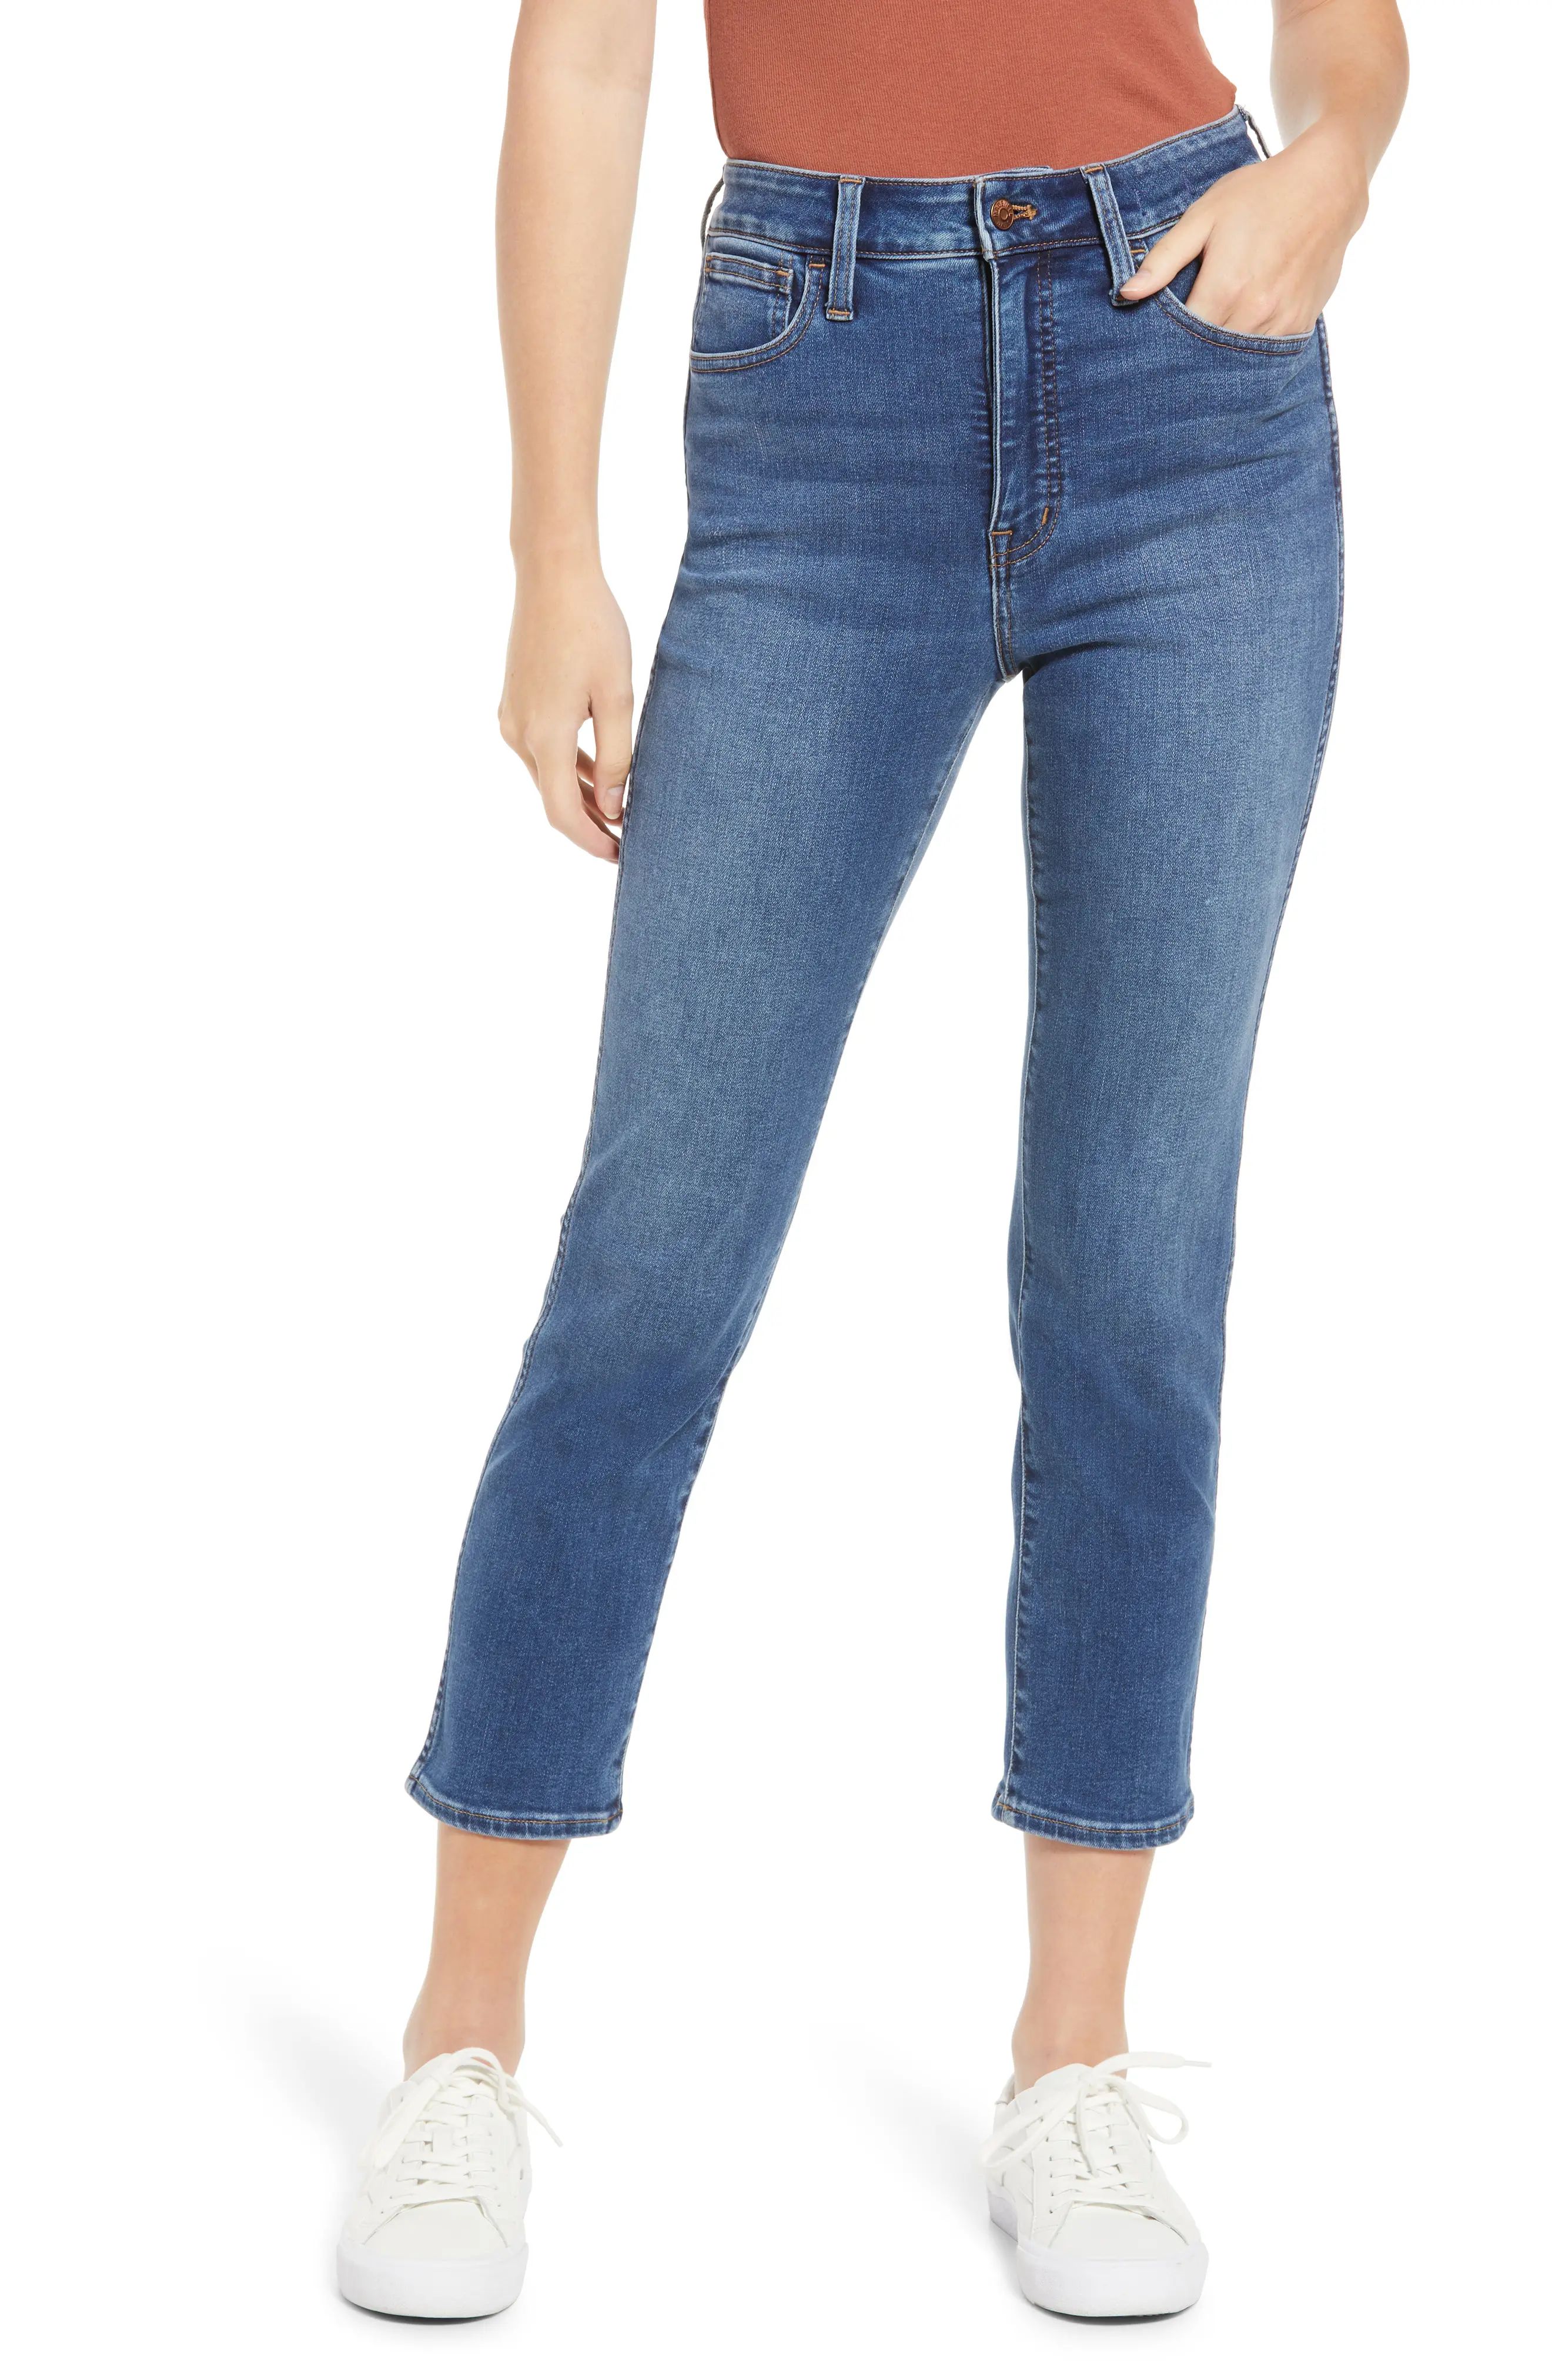 Madewell Roadtripper Curvy High Waist Stovepipe Jeans, Size 28 in Glynn Wash at Nordstrom | Nordstrom